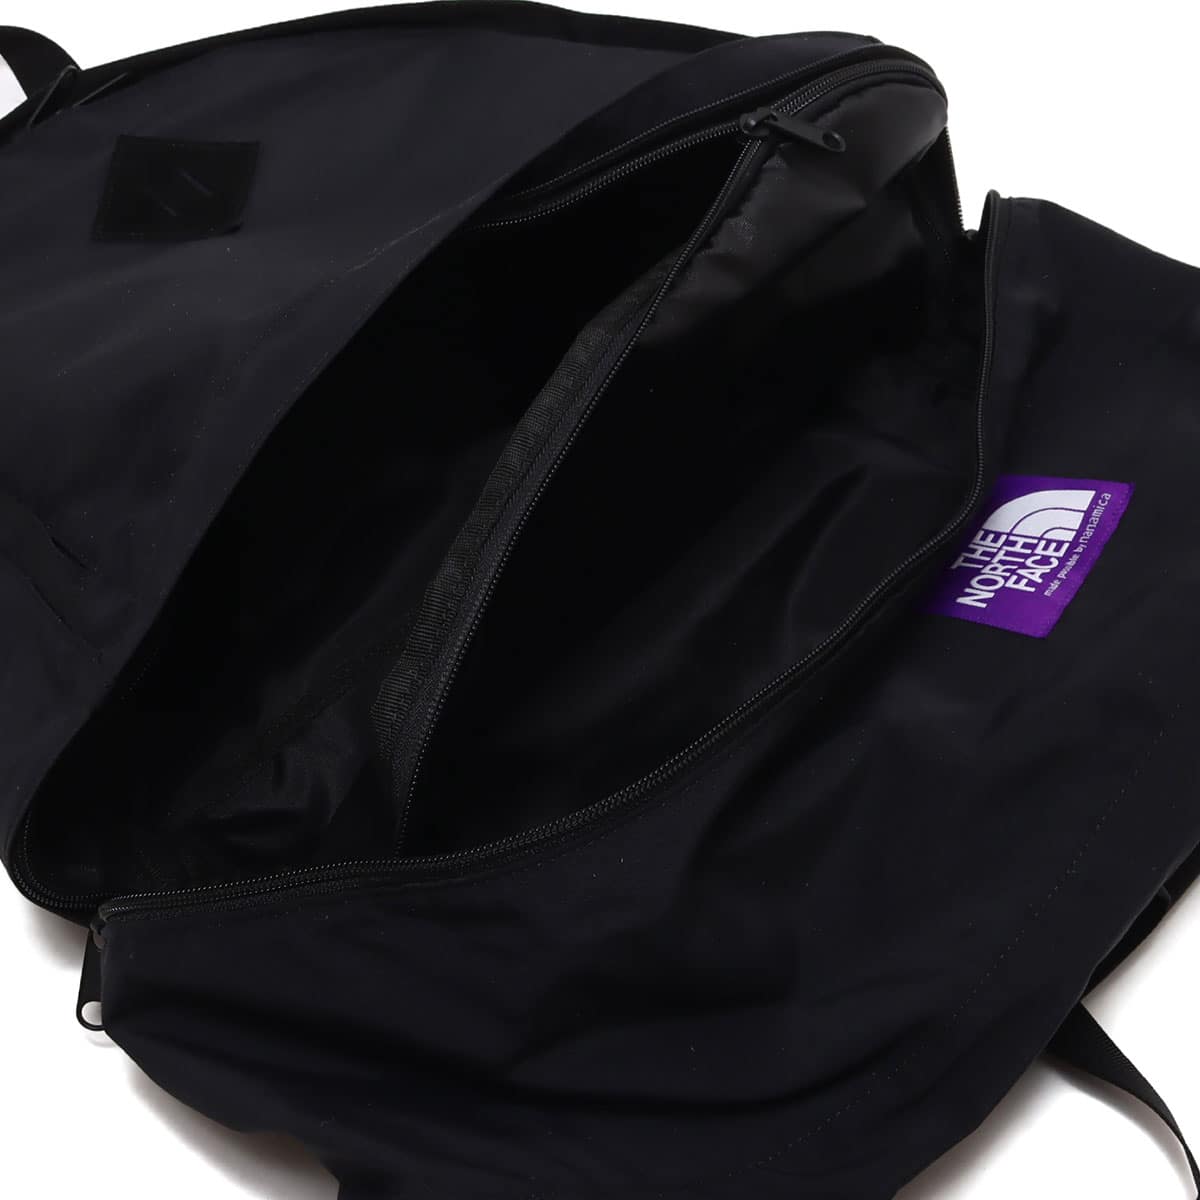 THE NORTH FACE PURPLE LABEL Field Day Pack Black 23SS-I